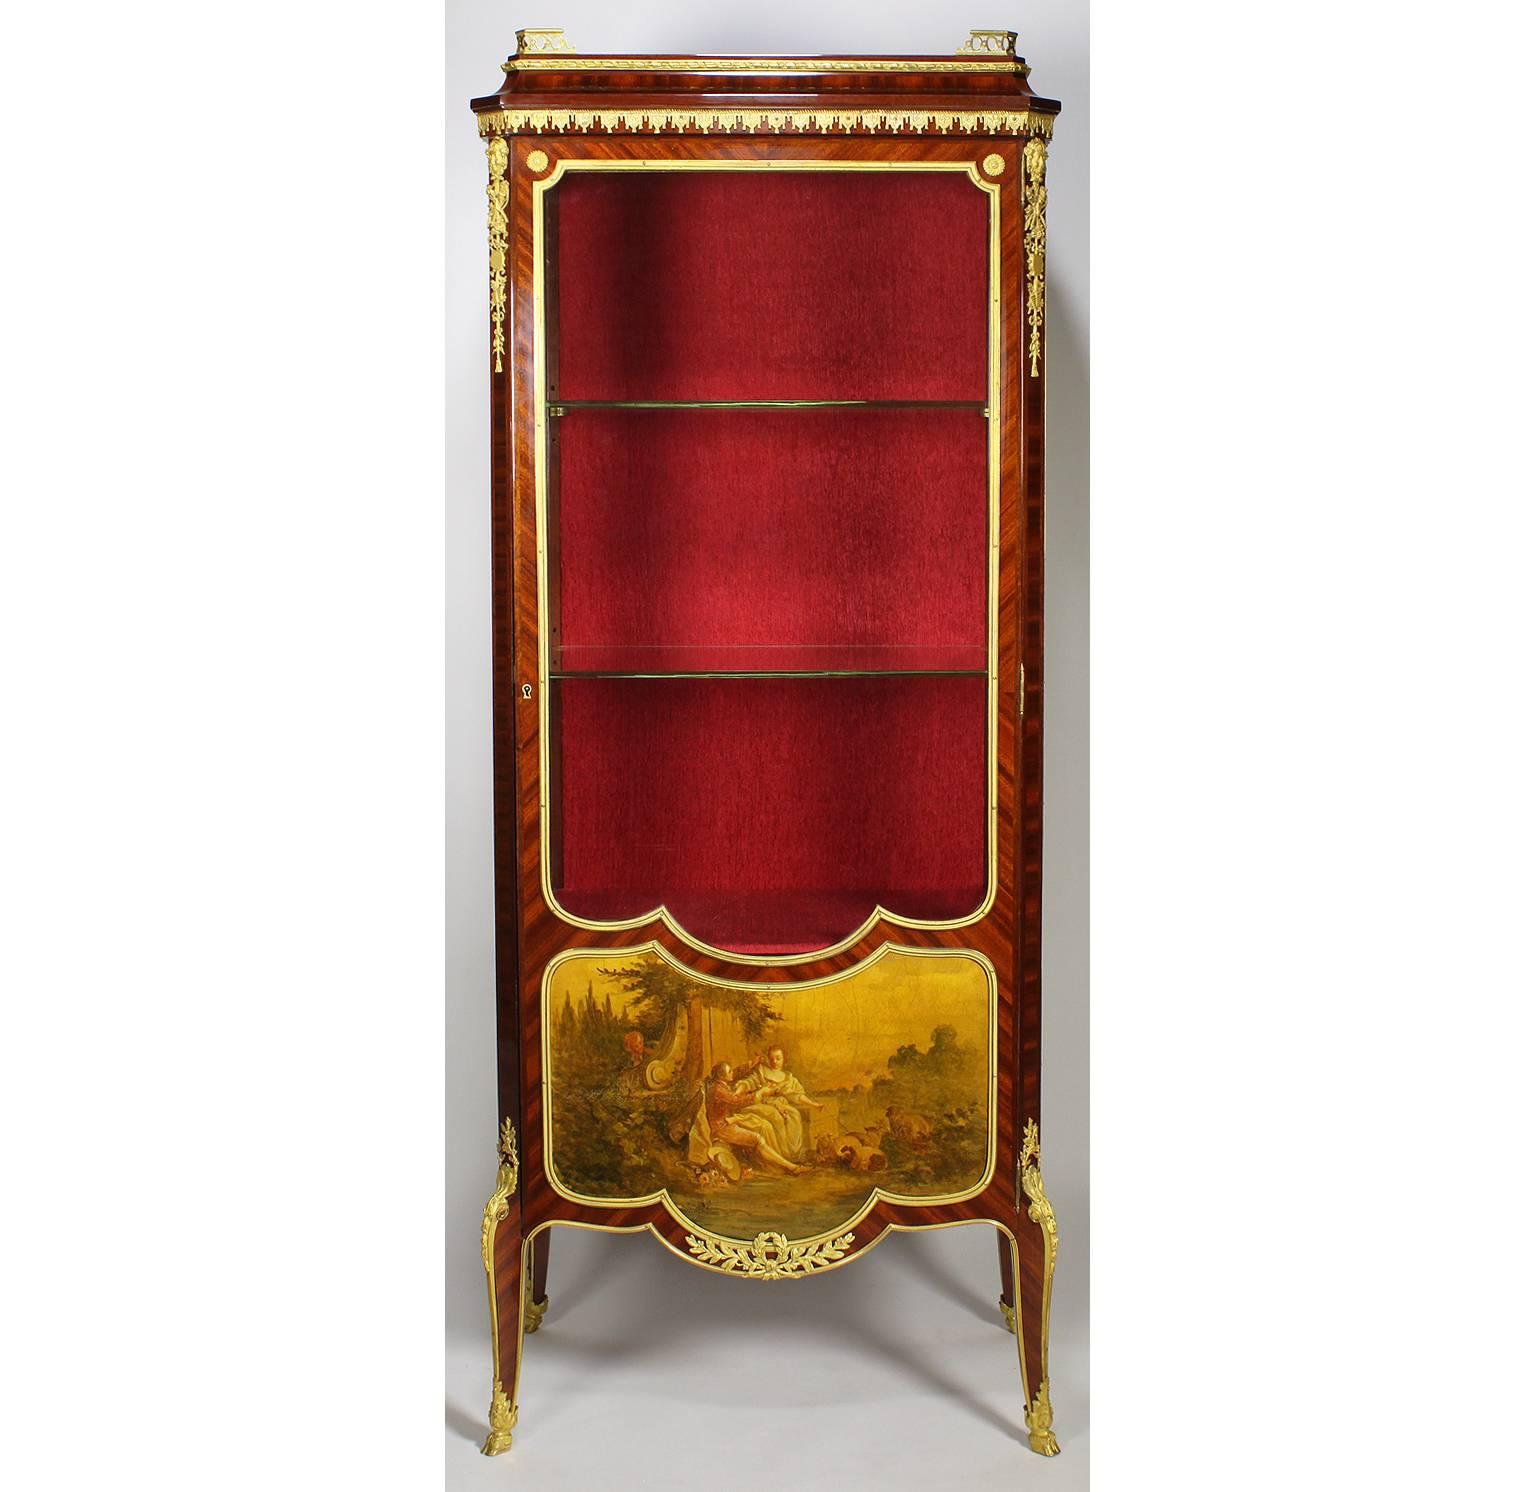 A very fine French Belle Époque 19th century tulipwood and gilt bronze-mounted Vernis Martin decorated Vitrine by Louis Majorelle (French, 1859-1926). The single door case with a hand-painted board depicting a garden courting scene surmounted with